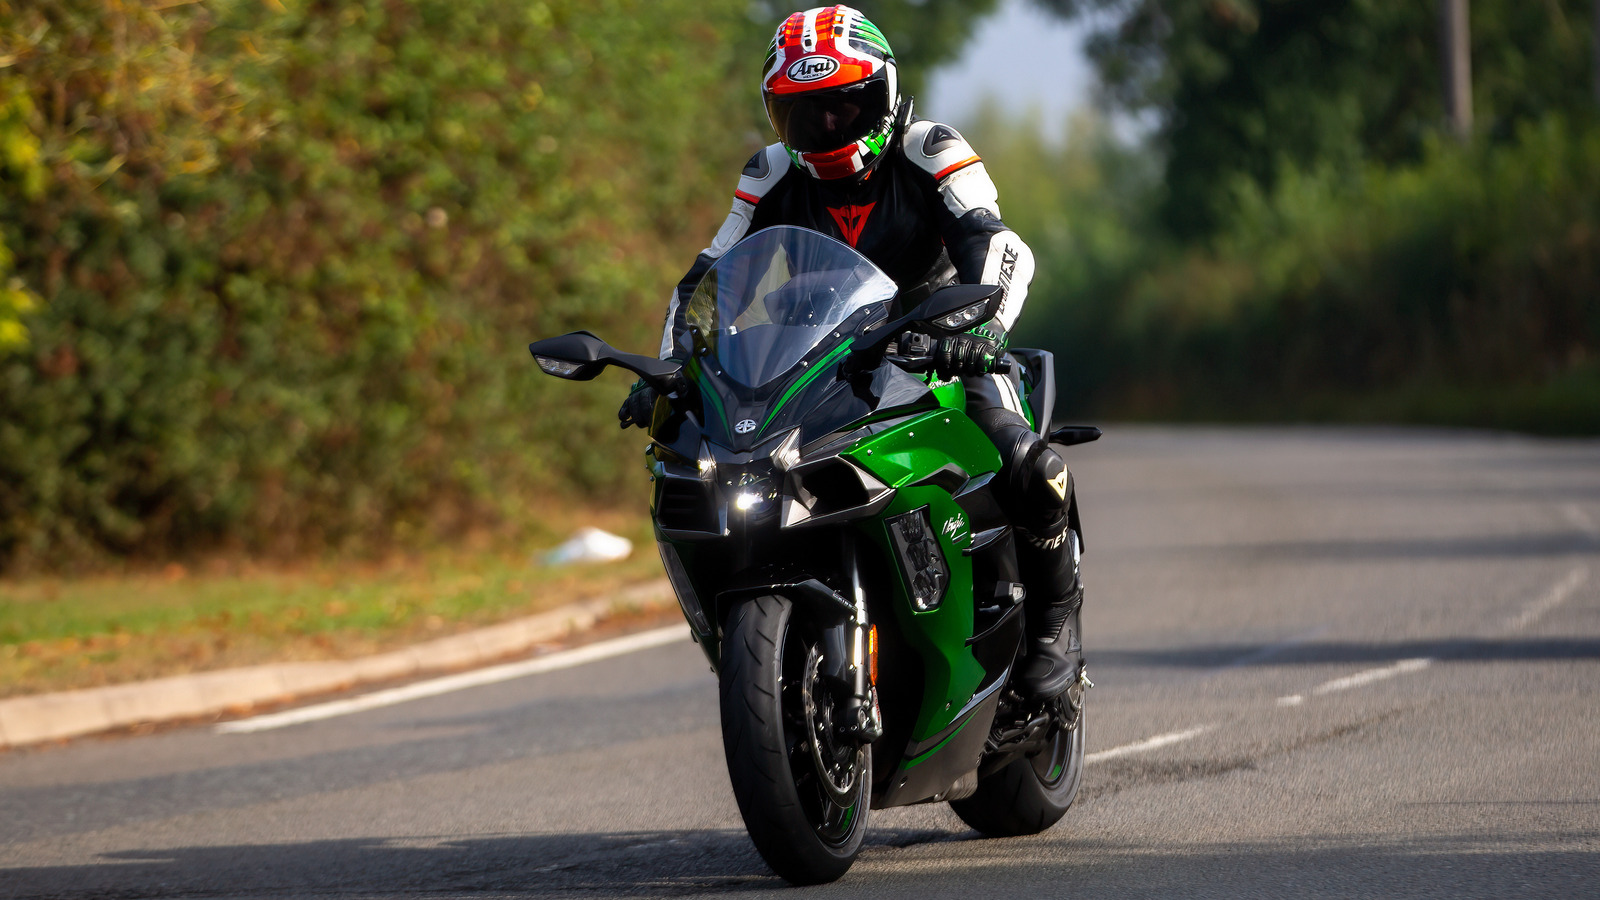 5 Must-Have Aftermarket Parts & Mods For Your Kawasaki Ninja